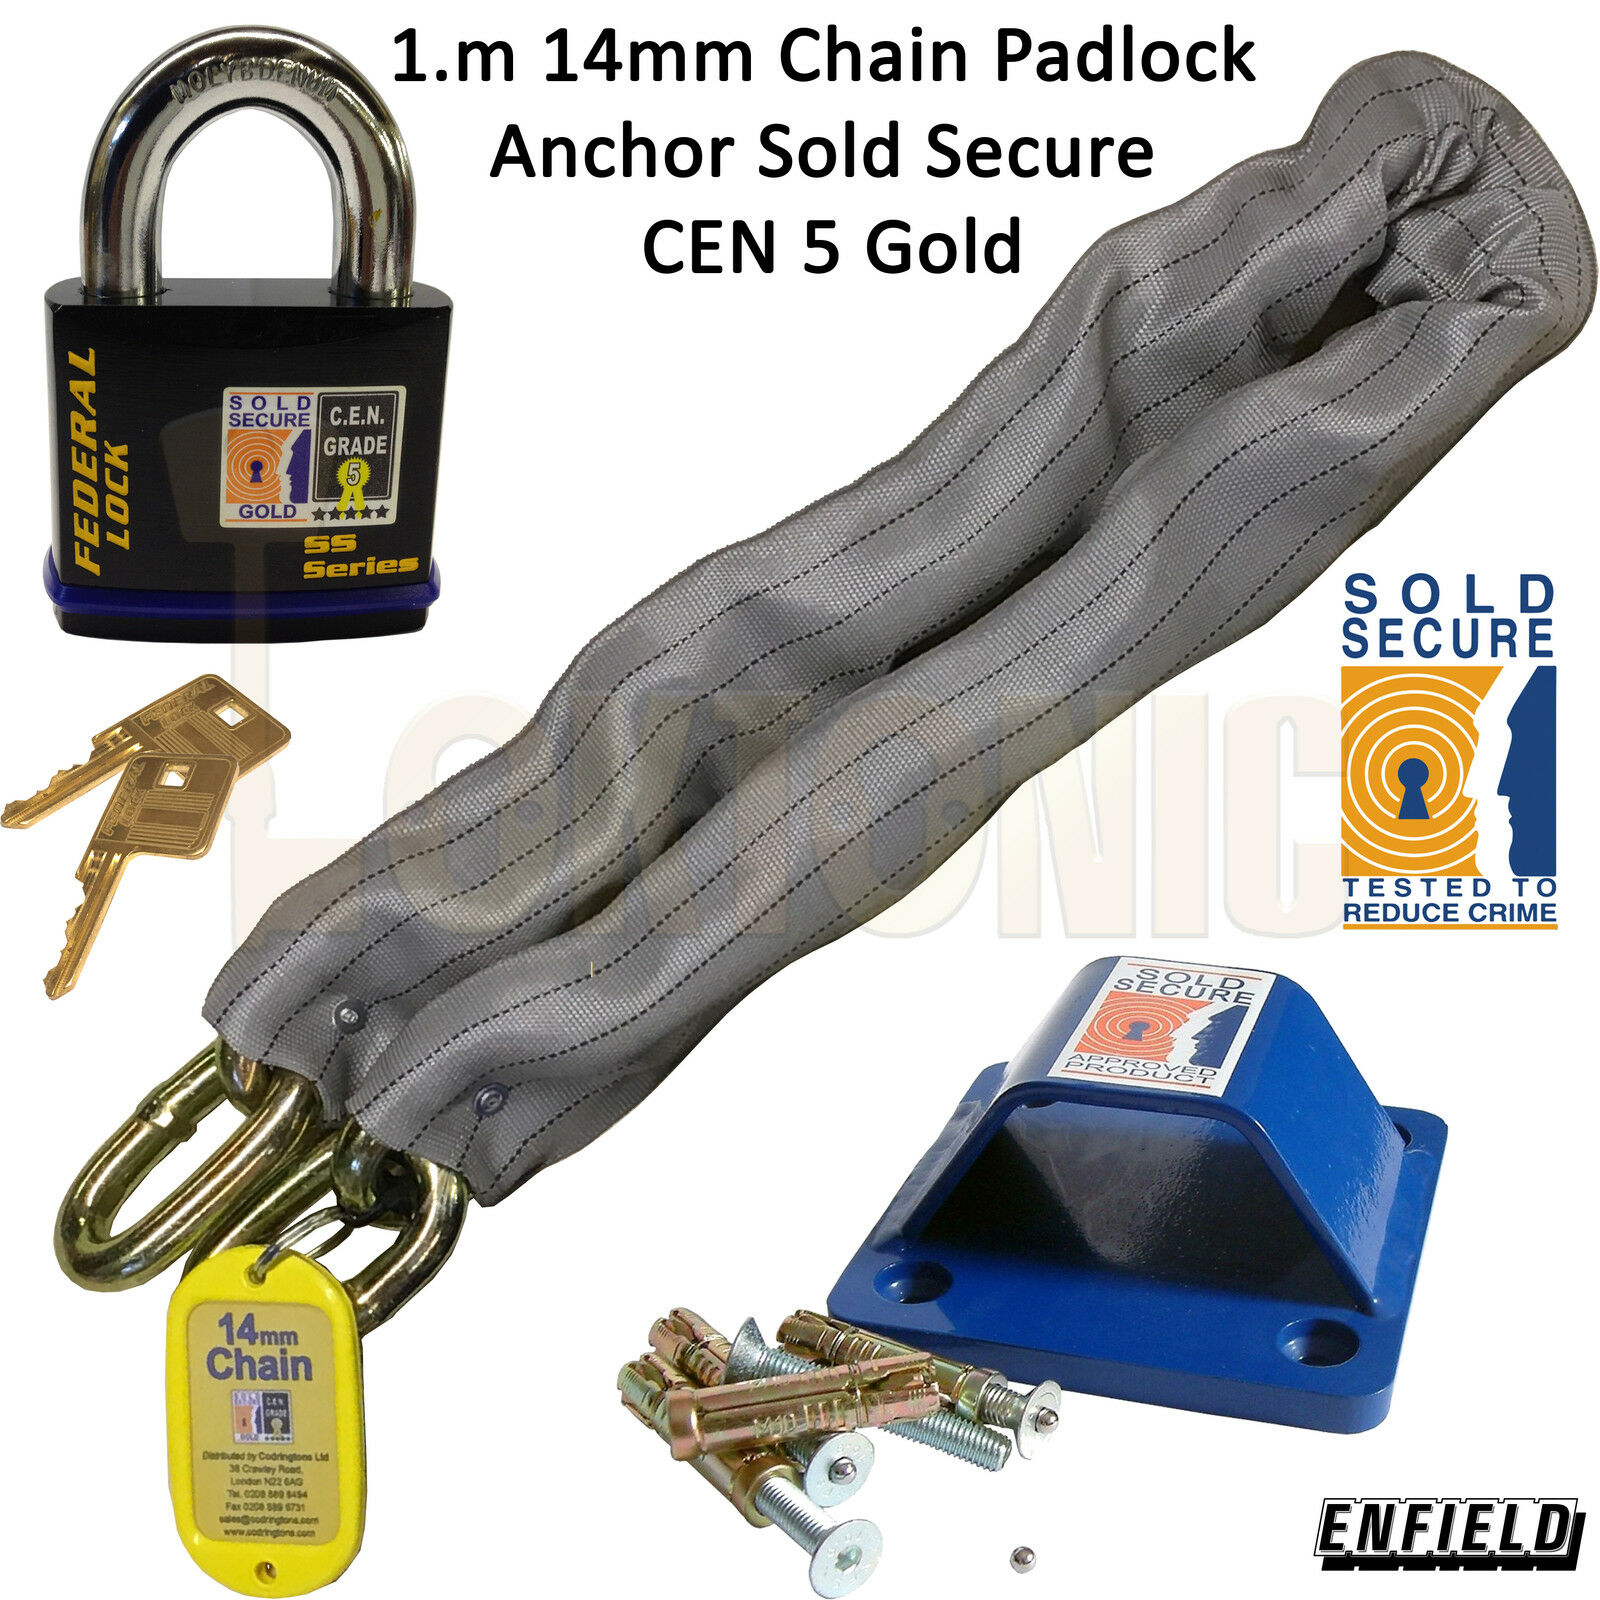 sold secure chain